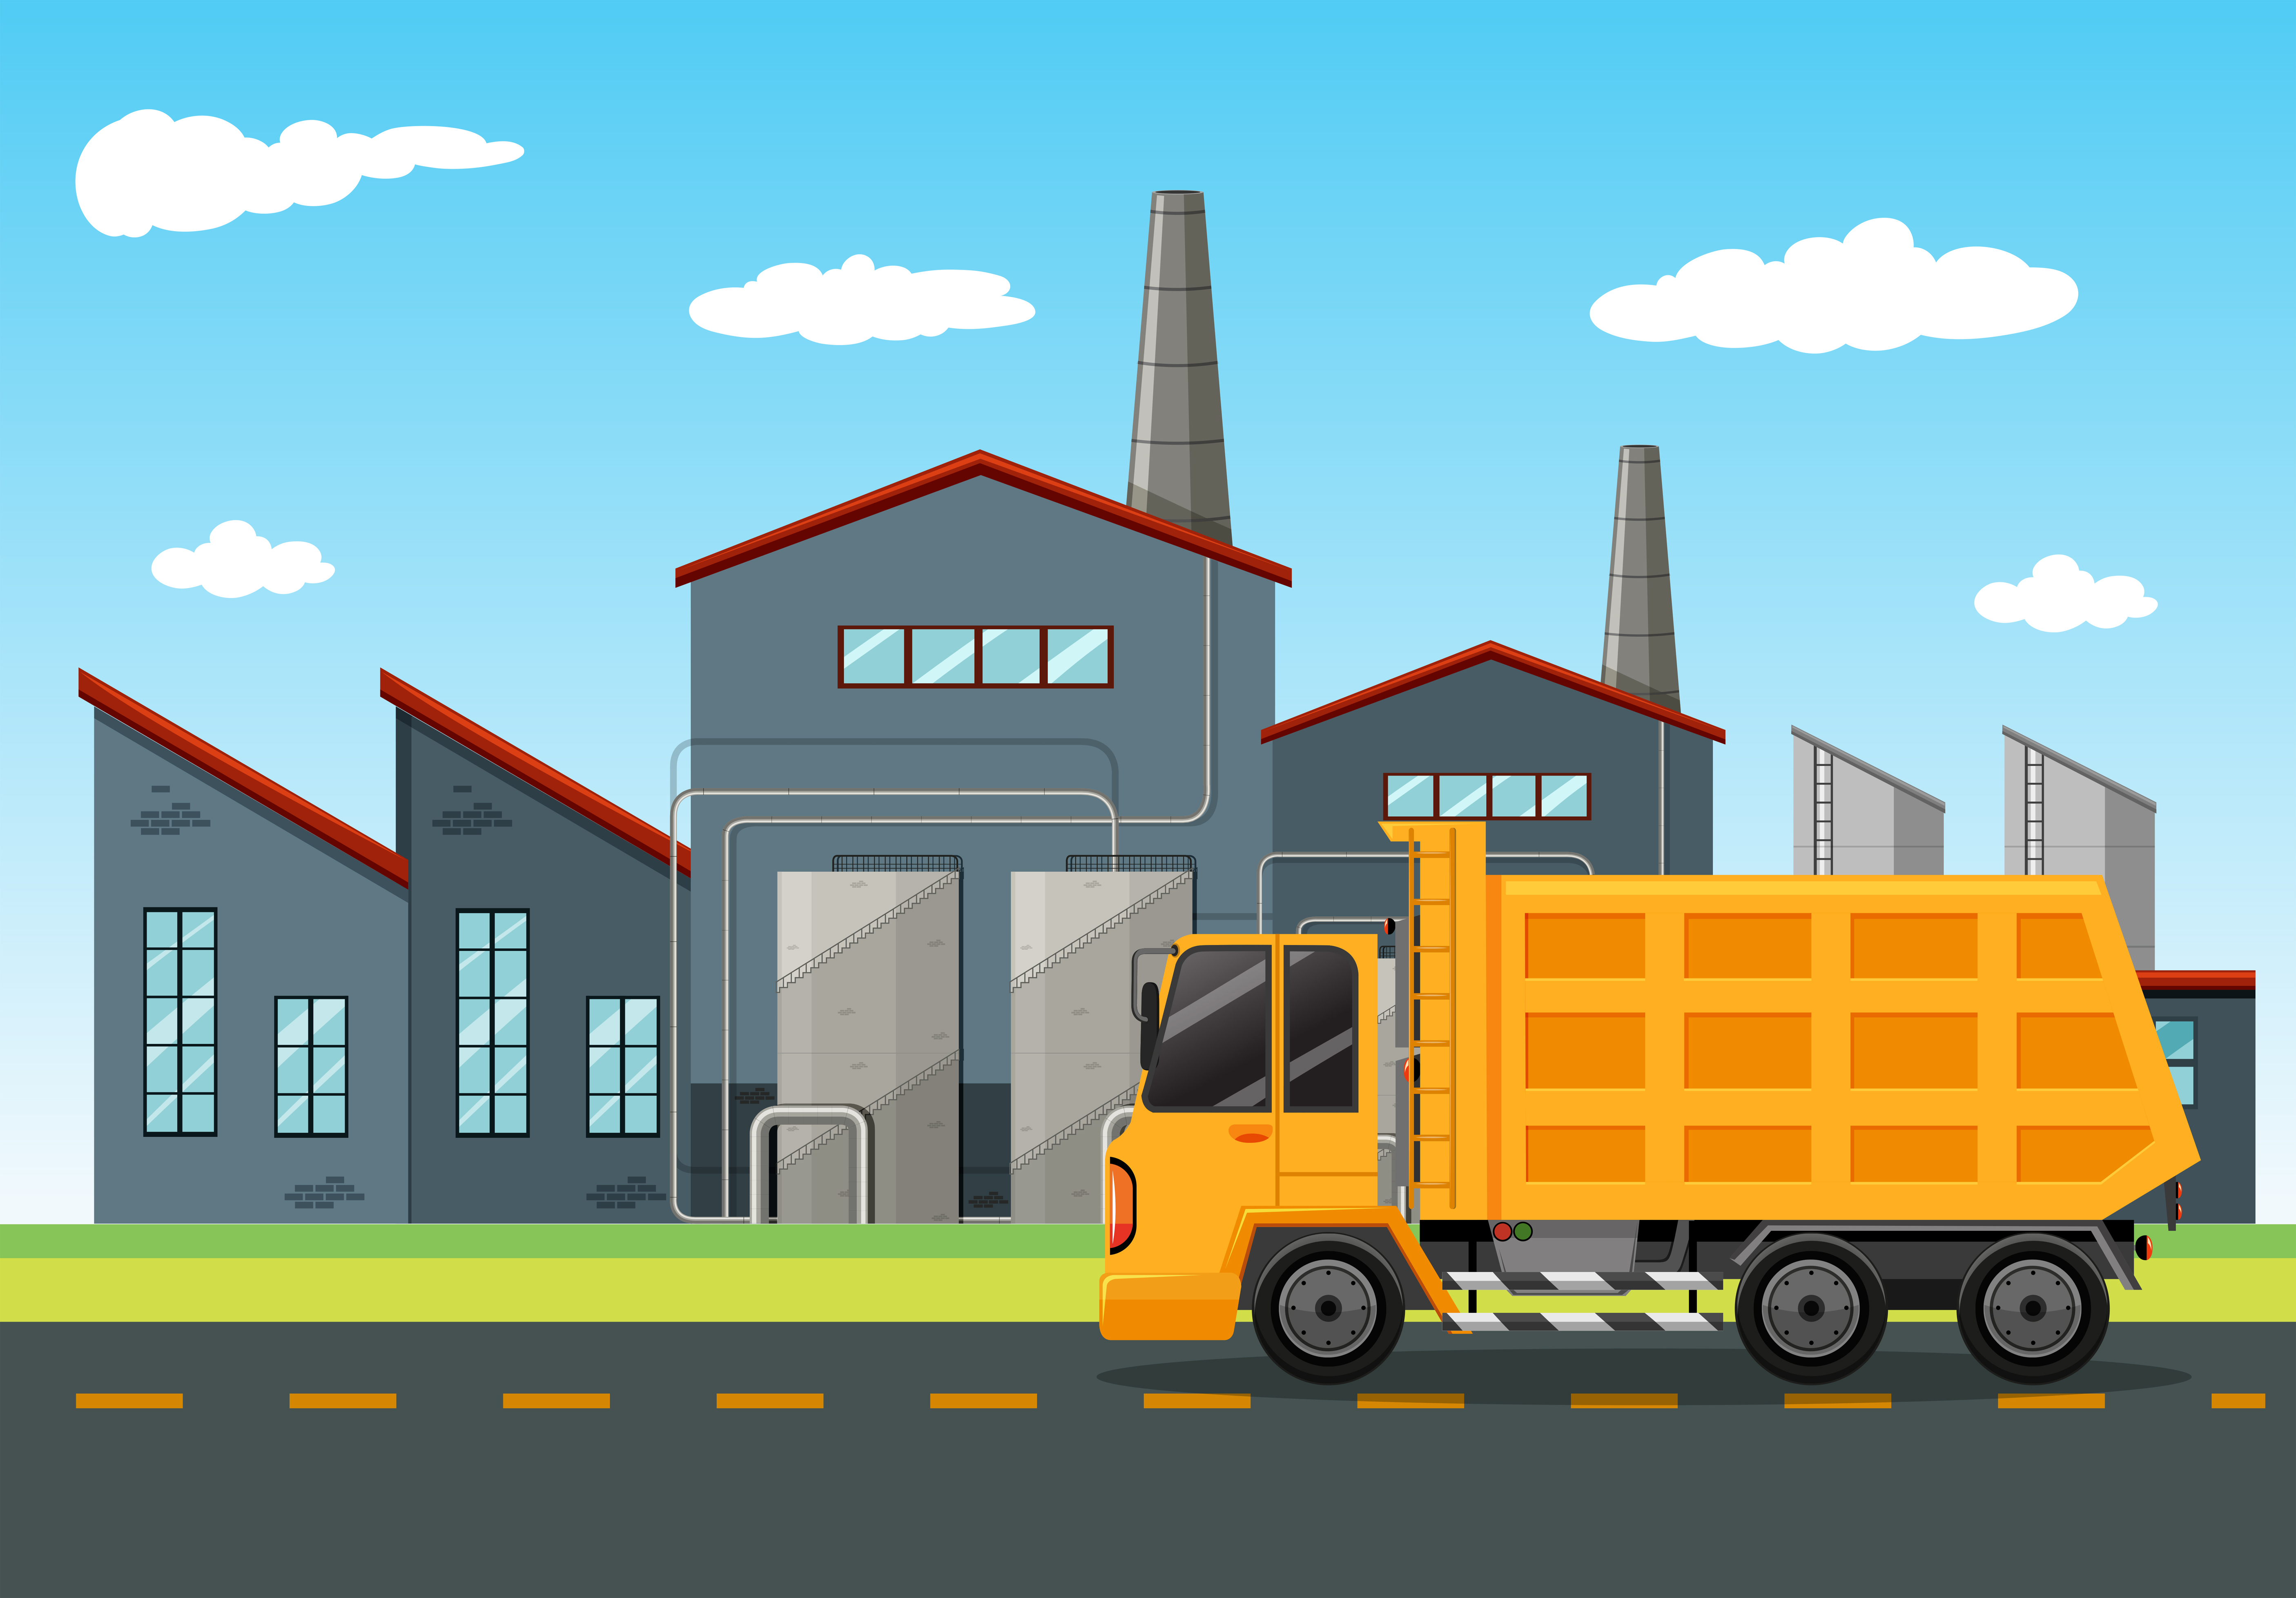 Factory scene with dumping truck Download Free Vectors 